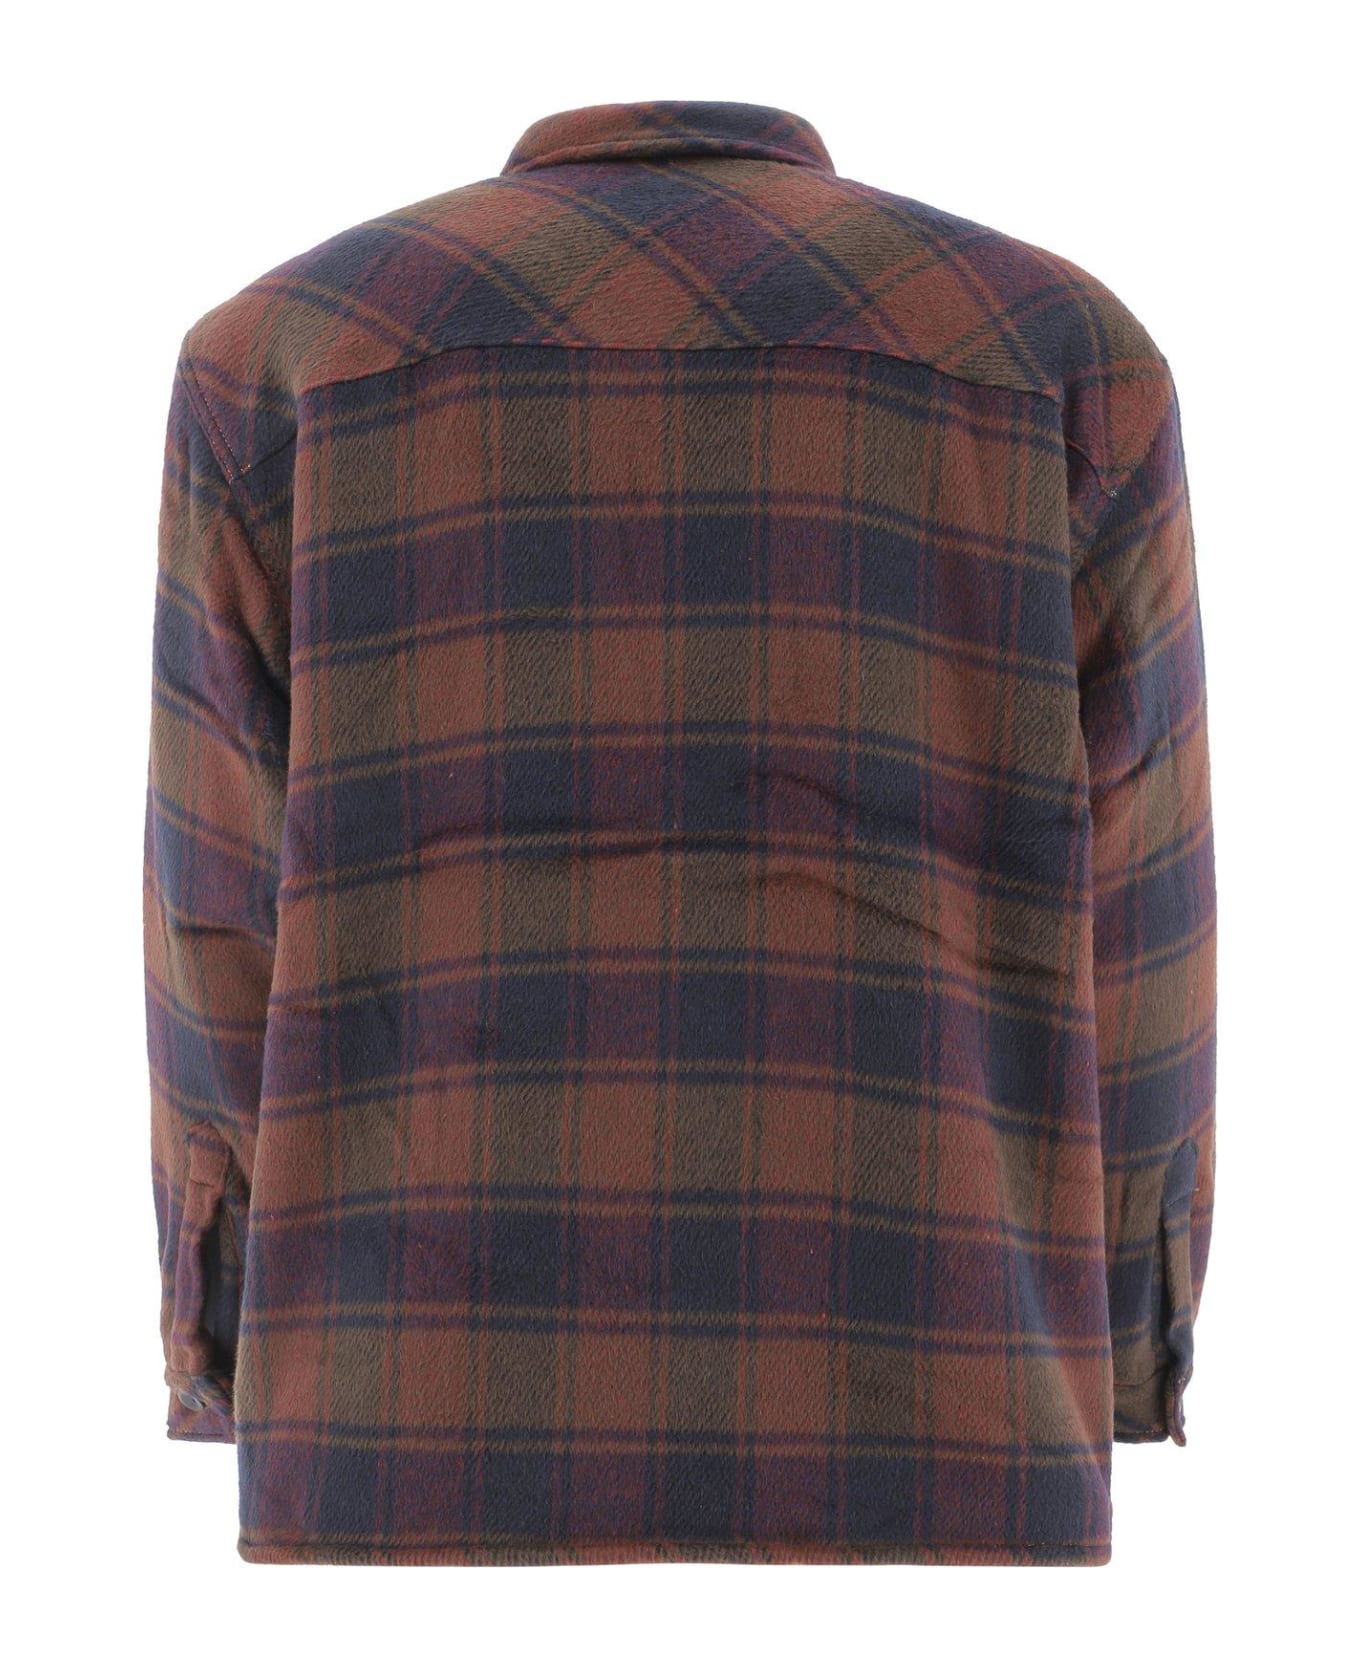 PACCBET Logo Embroidered Check Shirt Jacket - NAVY